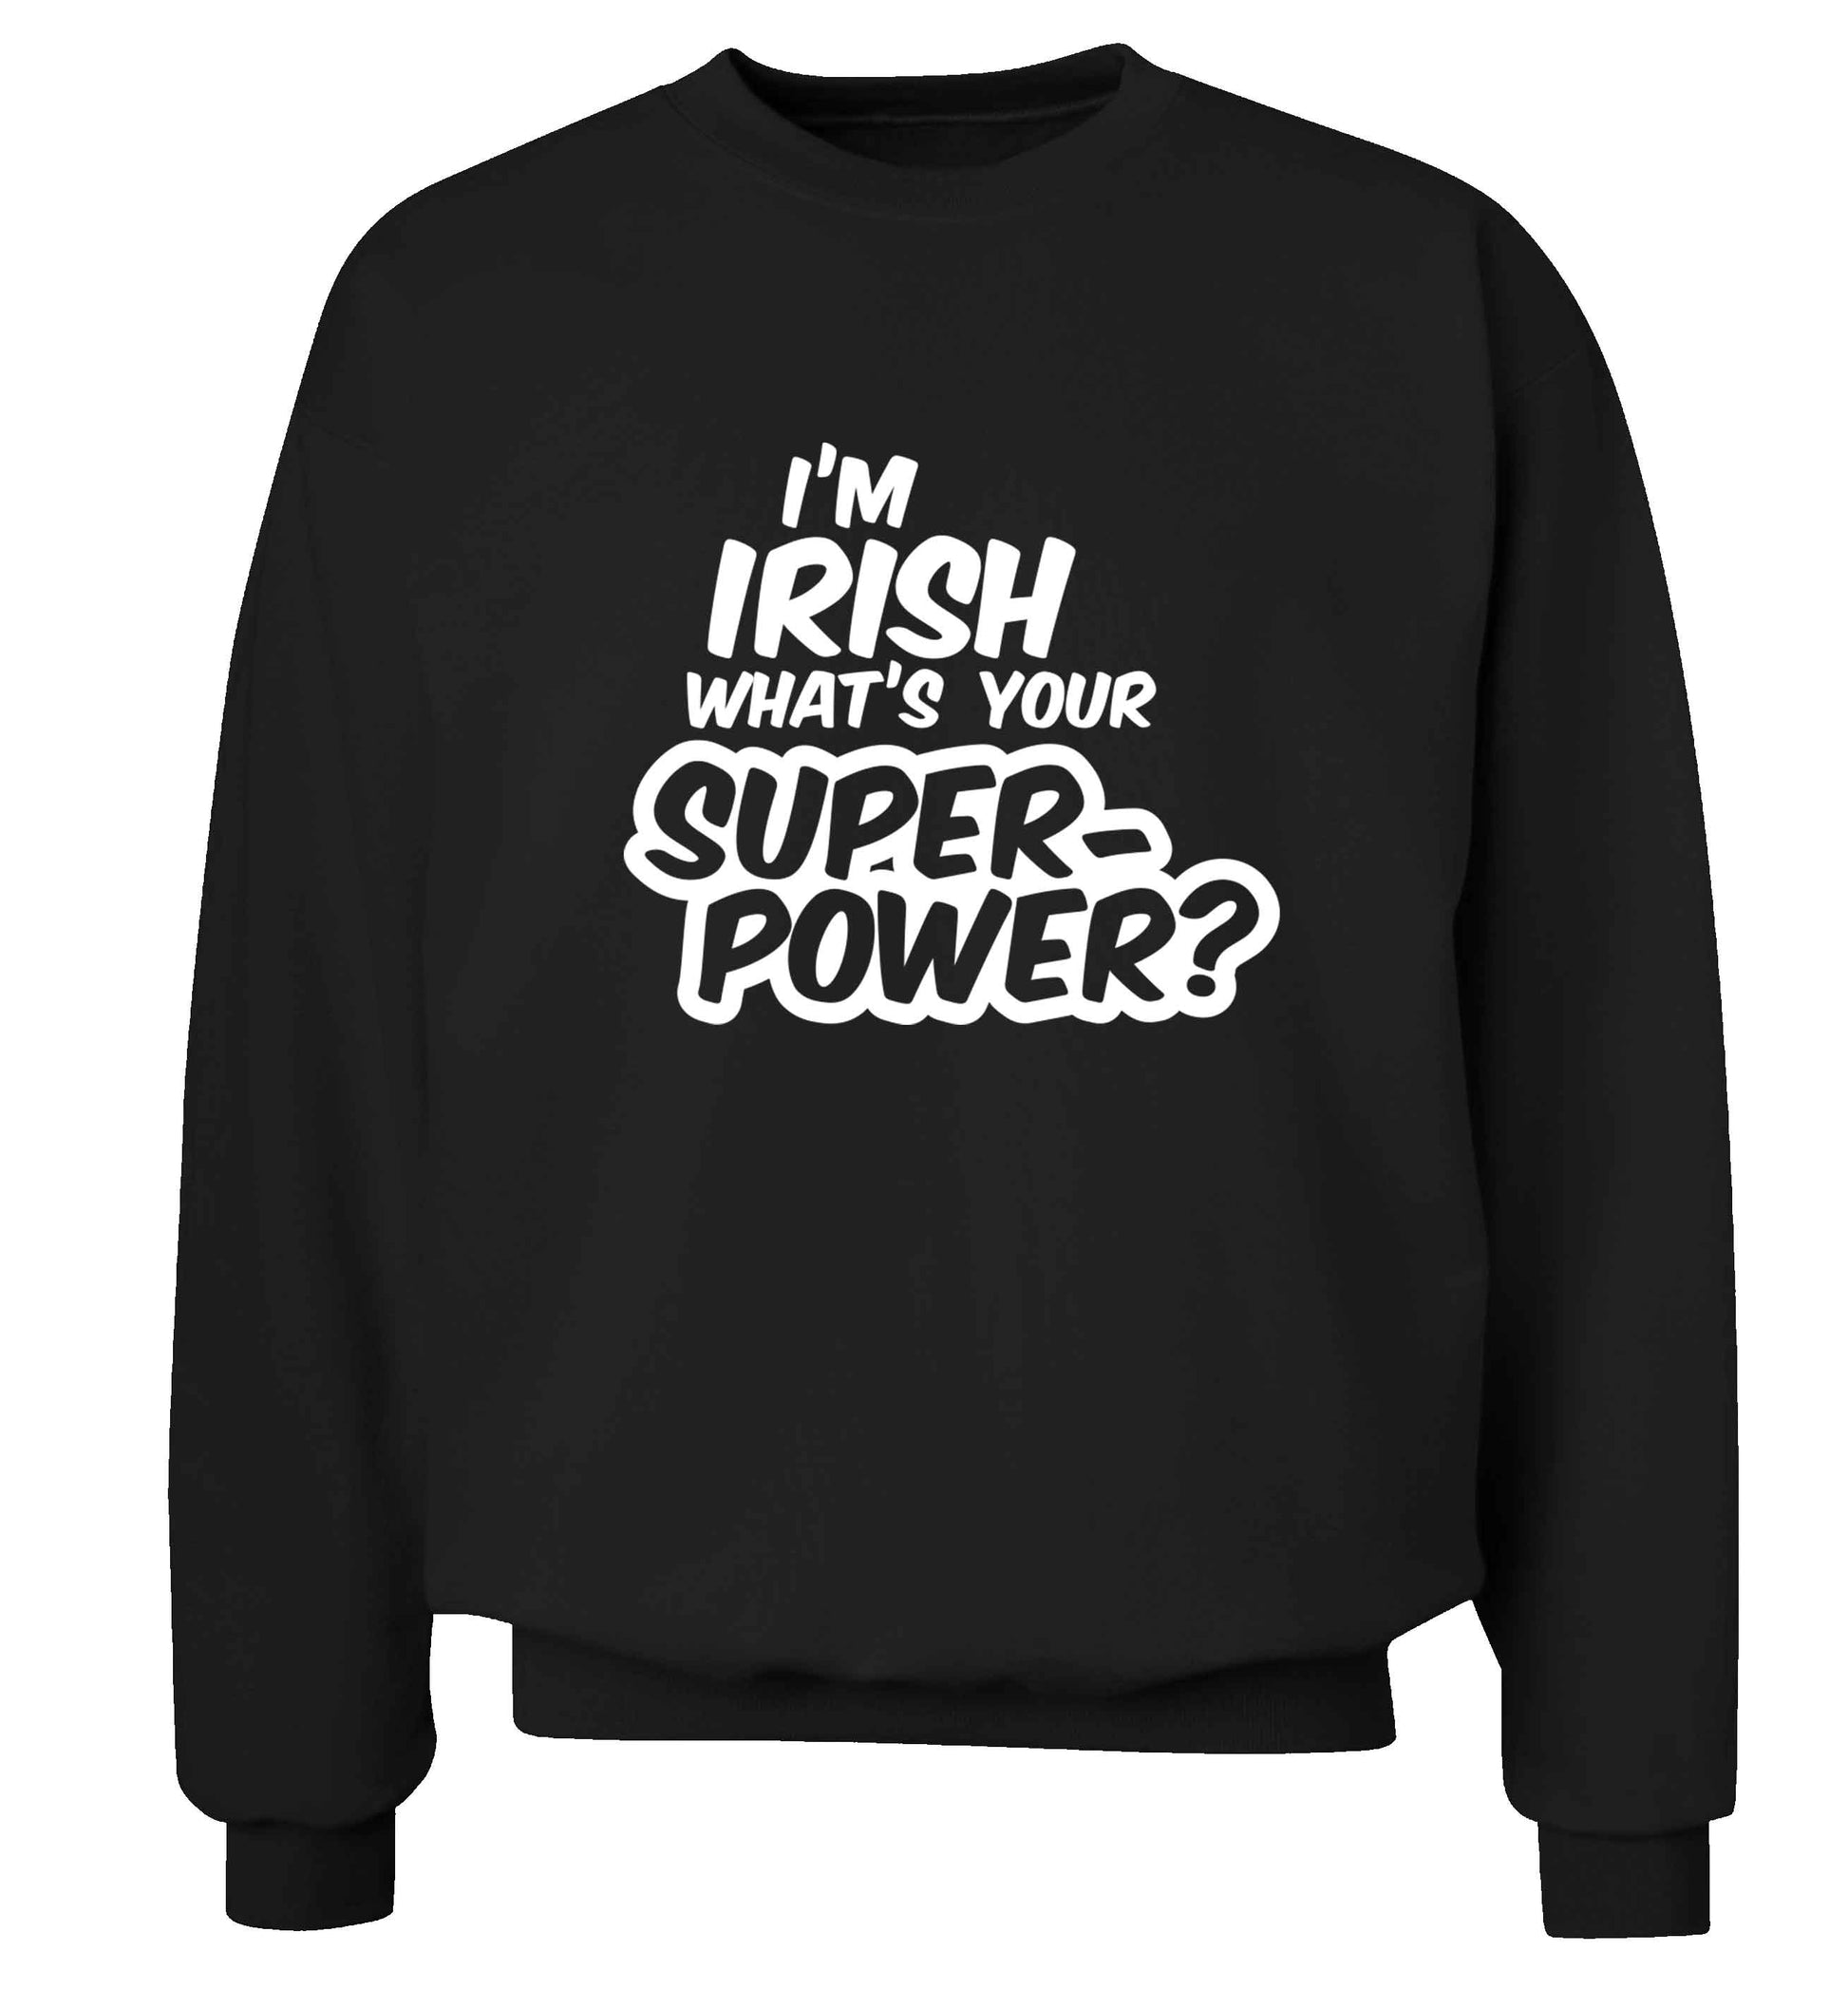 I'm Irish what's your superpower? adult's unisex black sweater 2XL